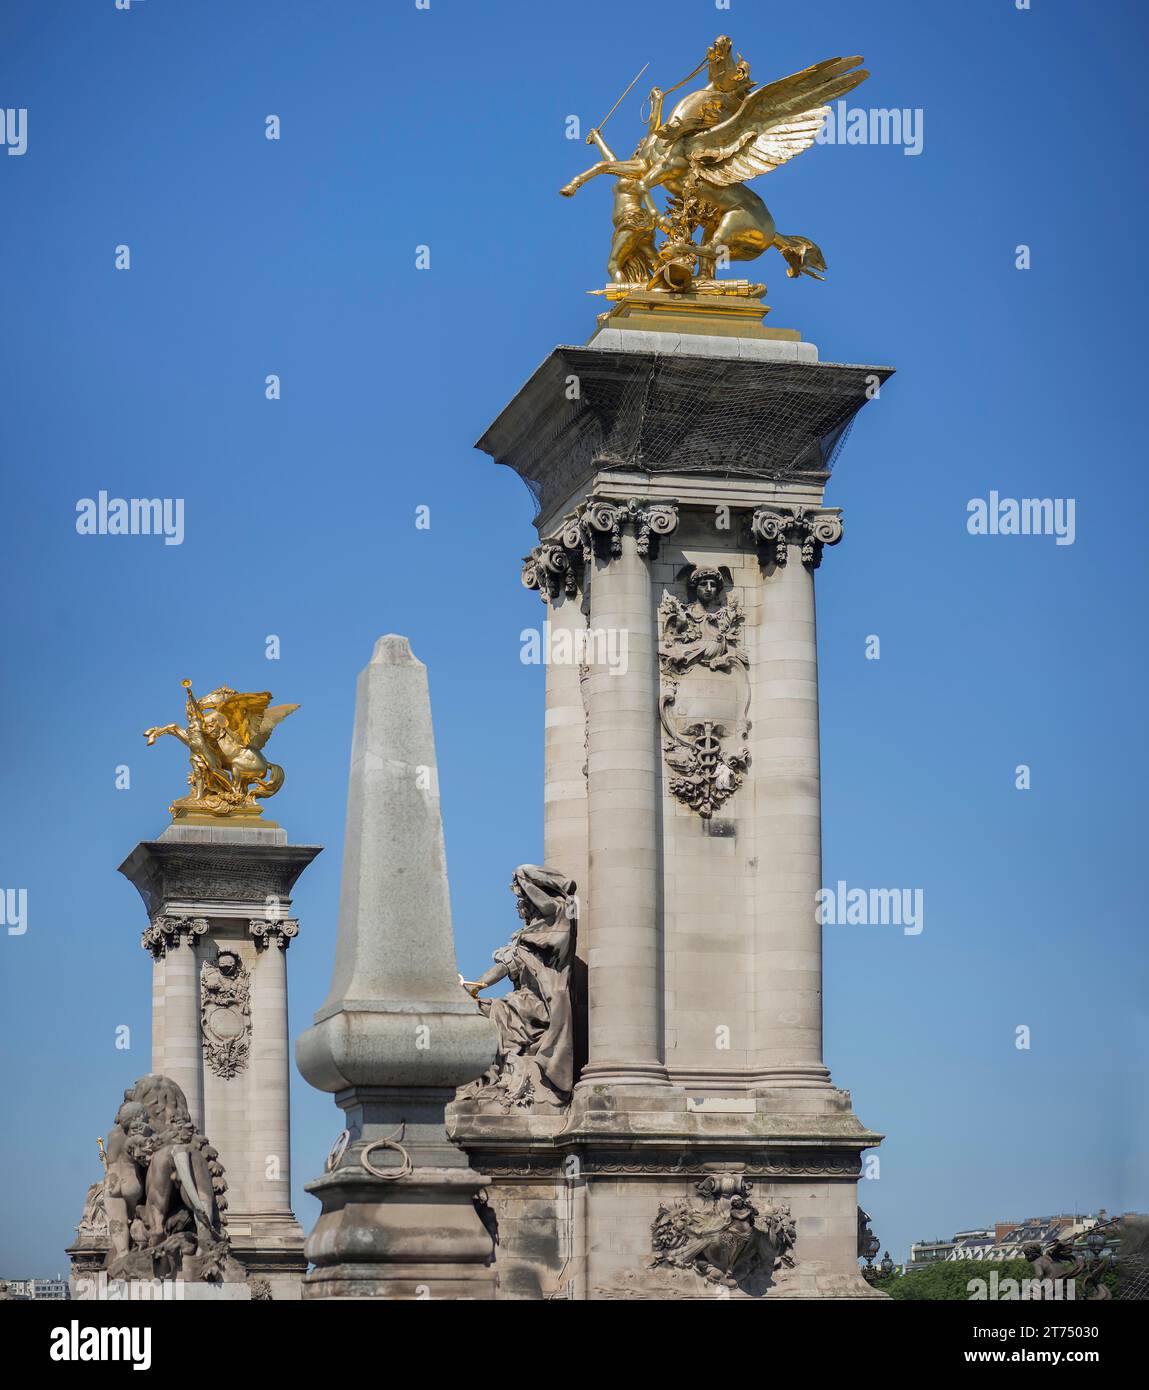 Columns and gilded sculptures on the Pont Alexandre III, Paris, France Stock Photo